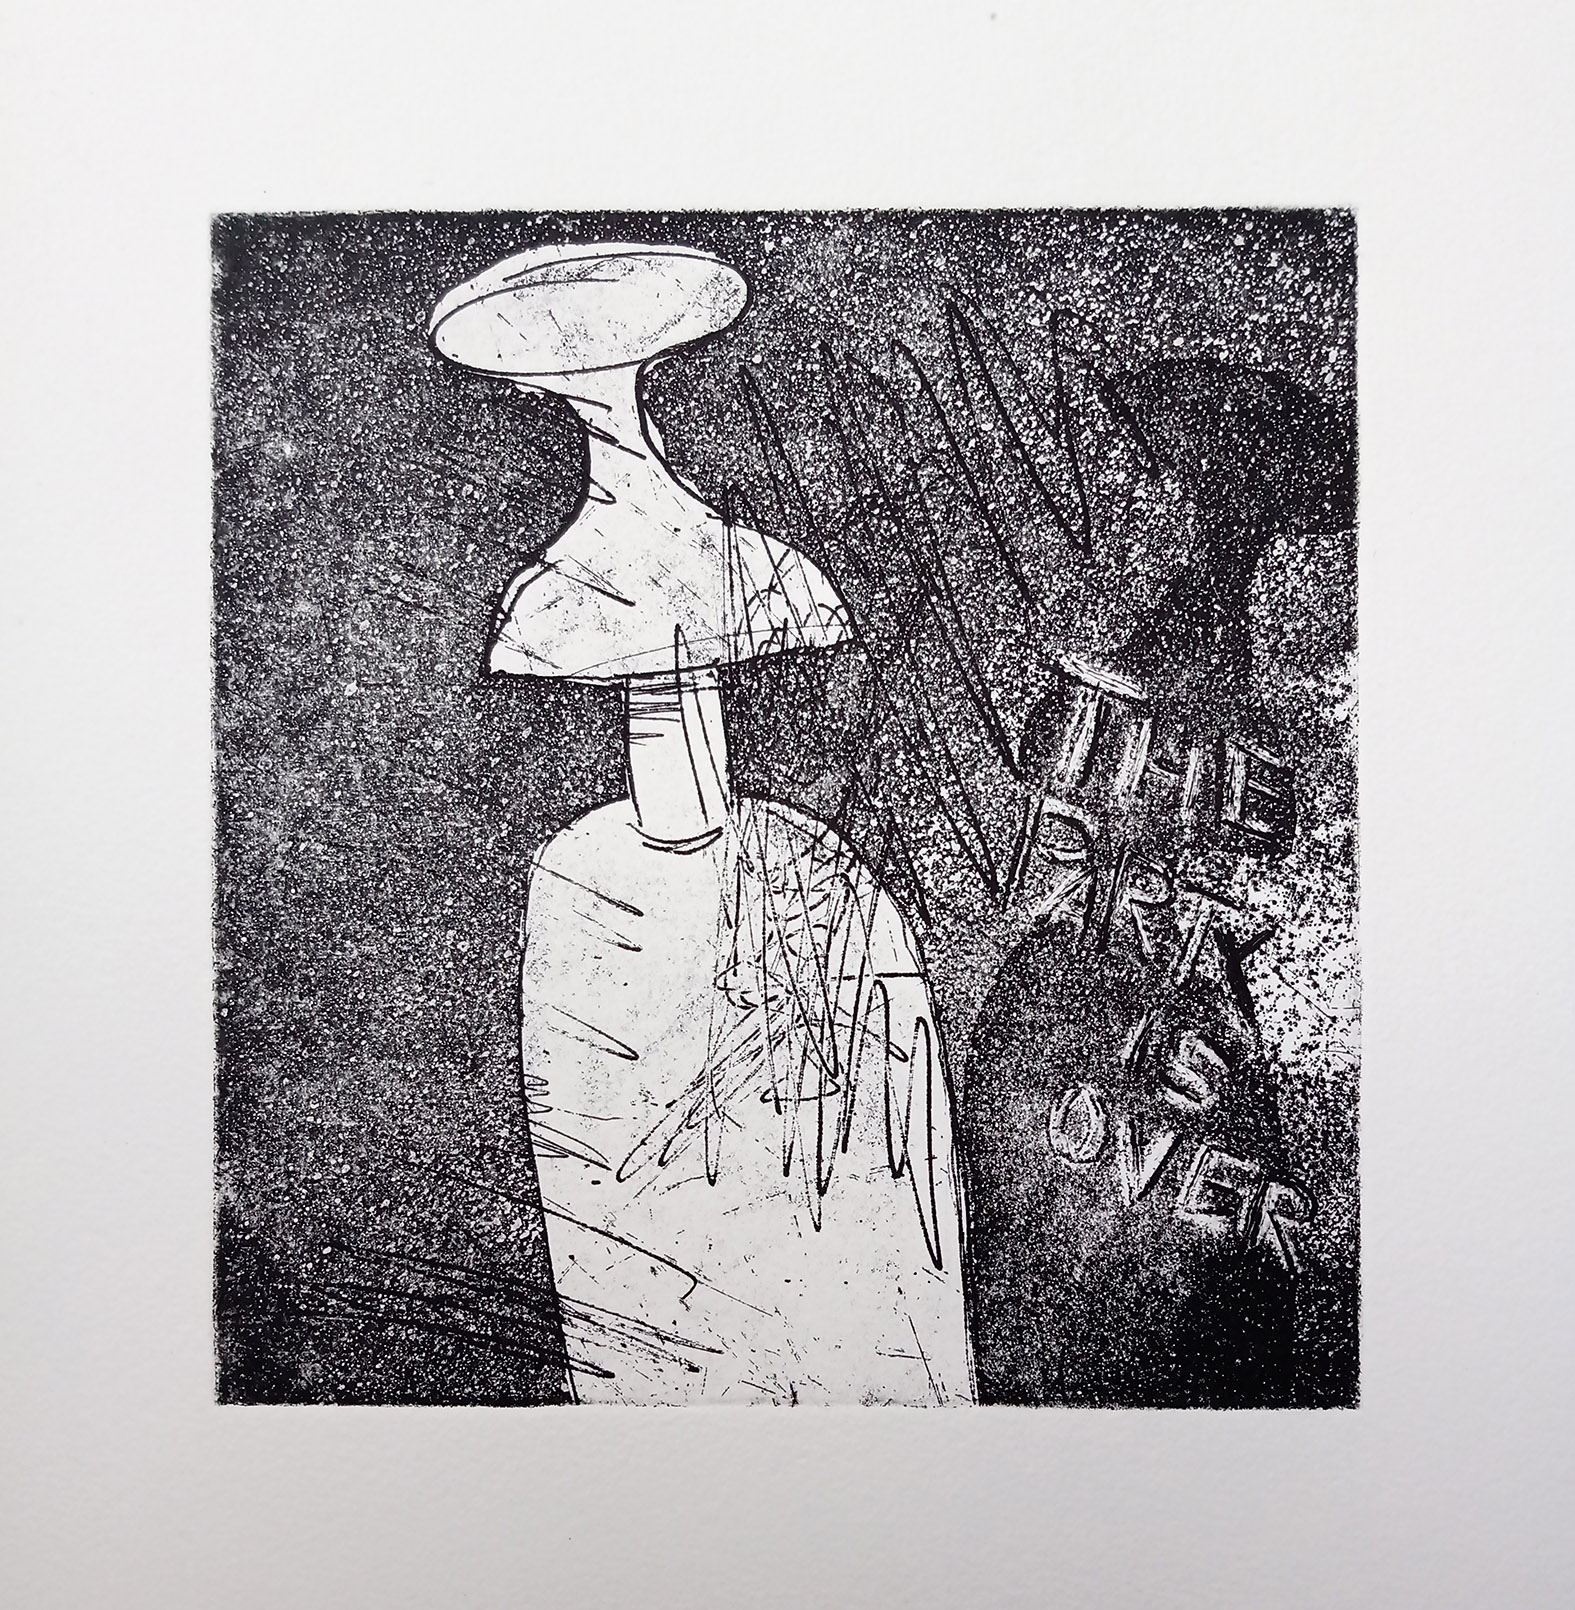 Etching on cotton paper, 14 x 14 cm, 2021